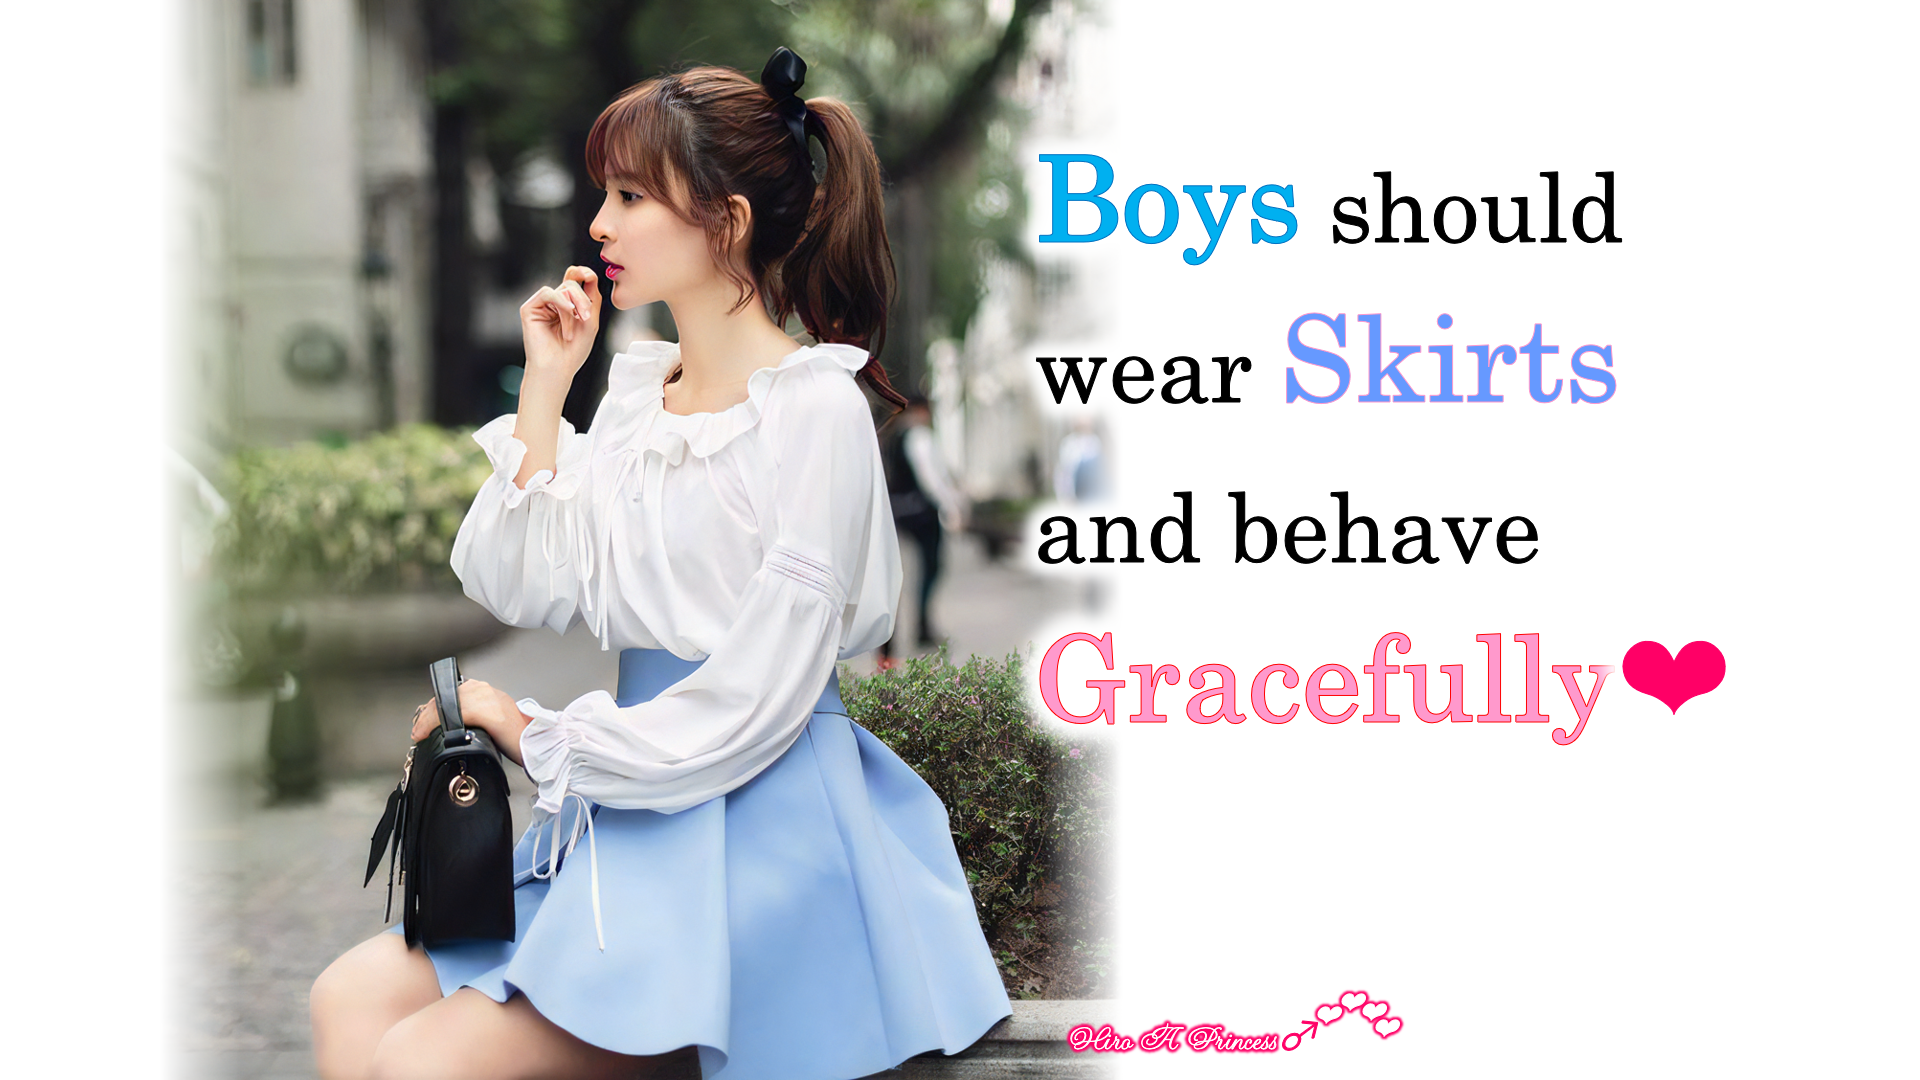 Boys should wear Skirts and behave Gracefully E